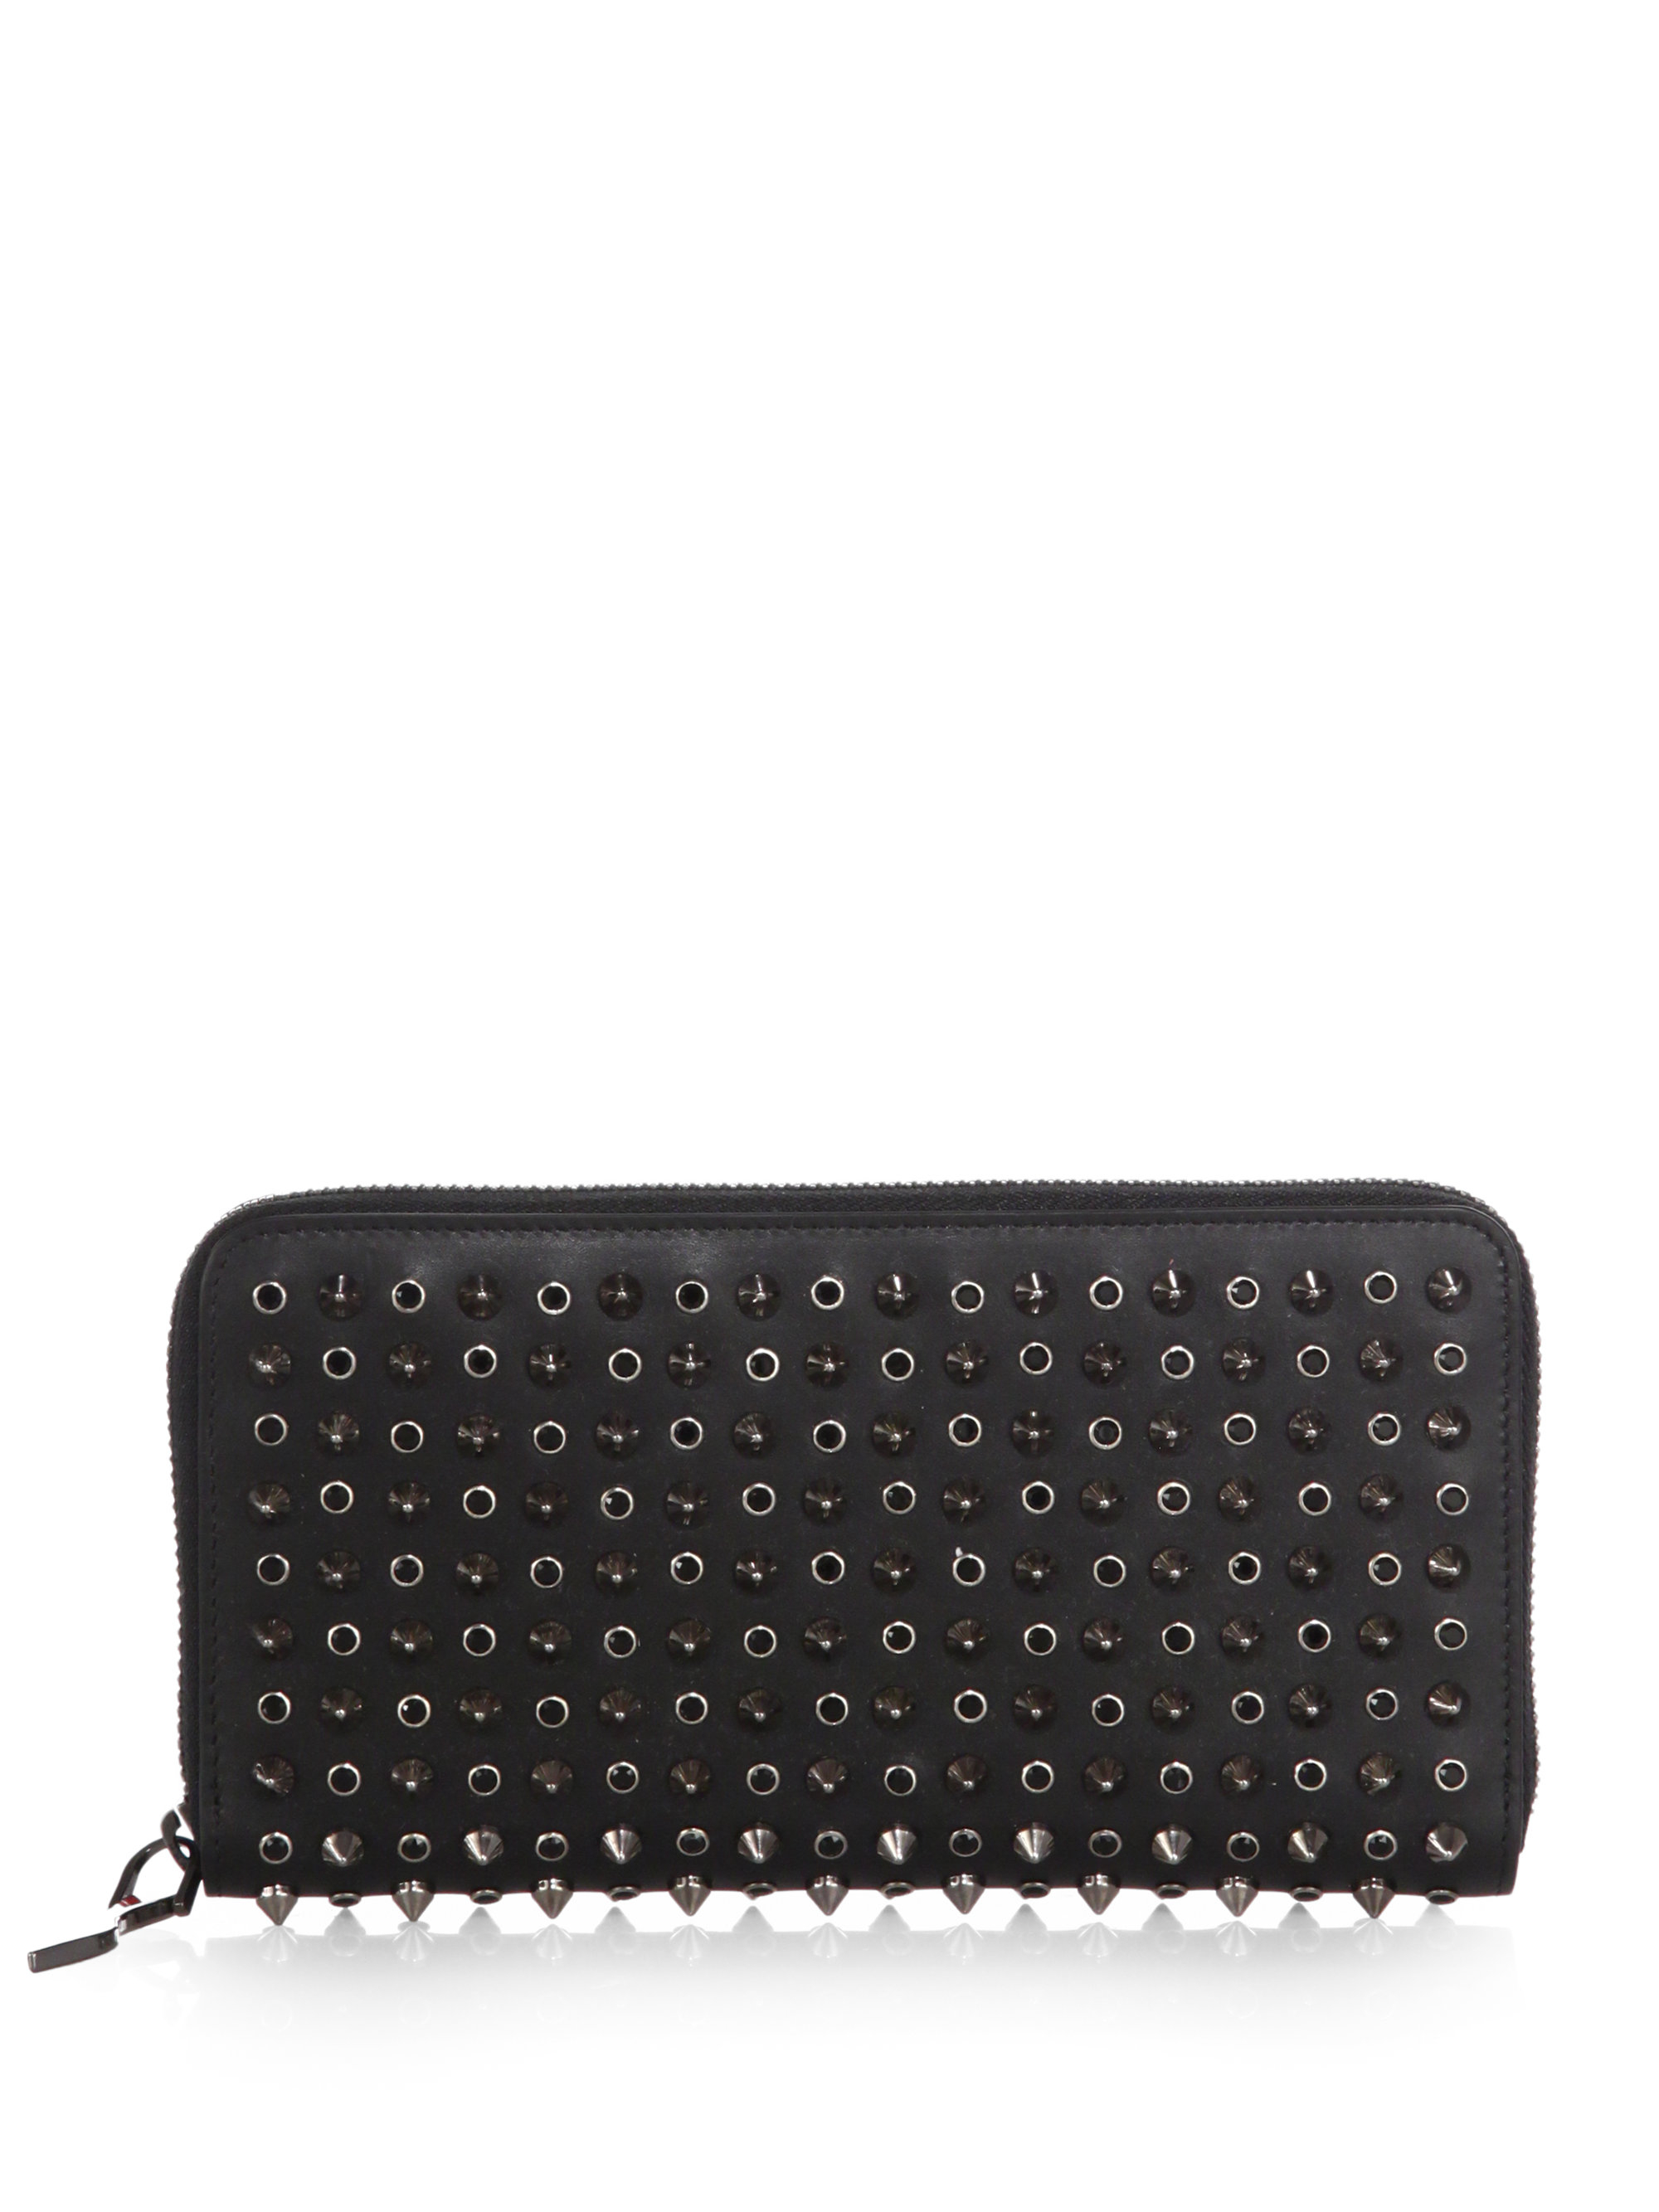 Christian Louboutin Panettone Studded Wallet in Black | Lyst